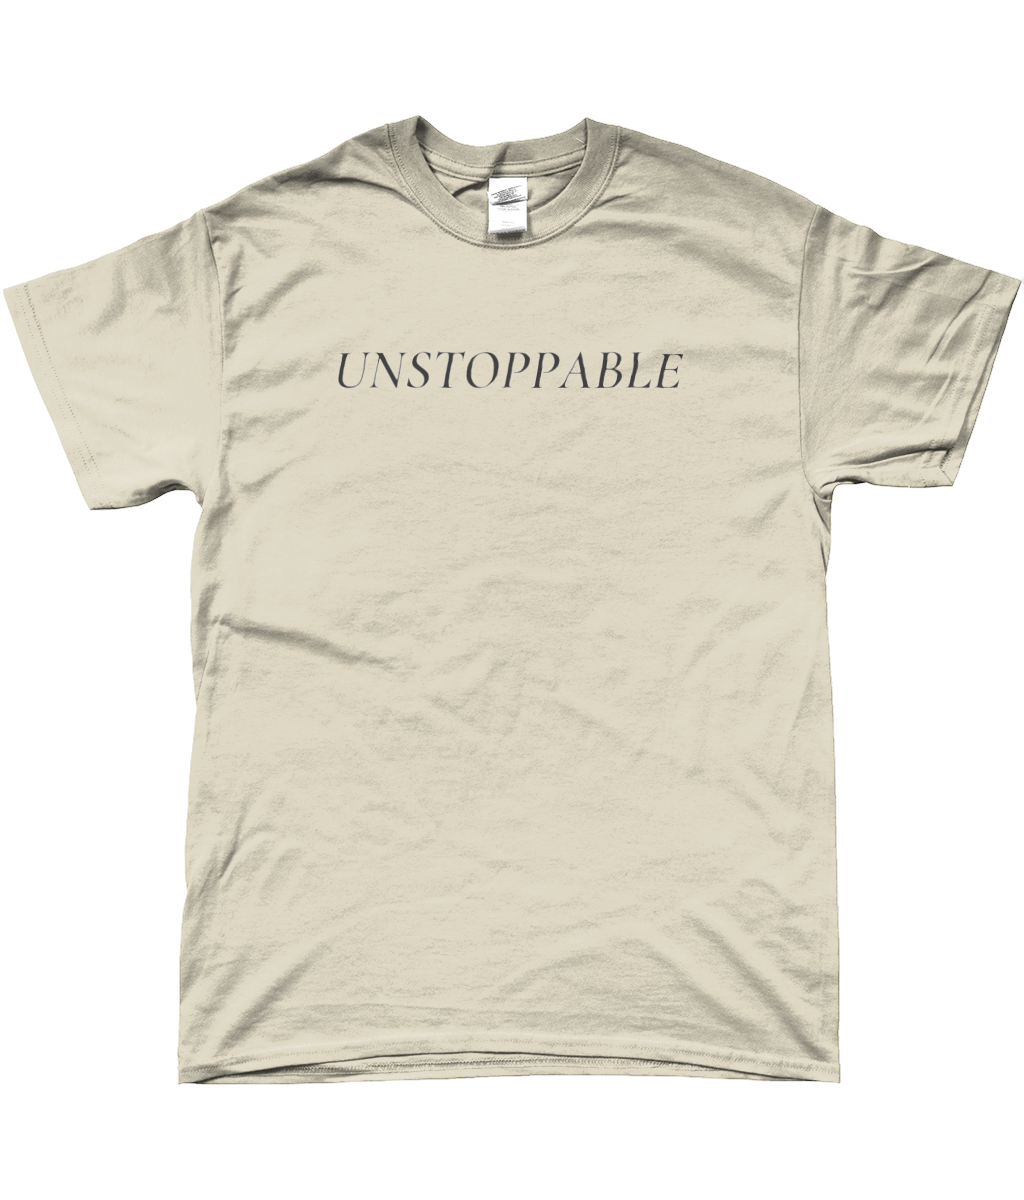 UNSTOPPABLE T-SHIRT